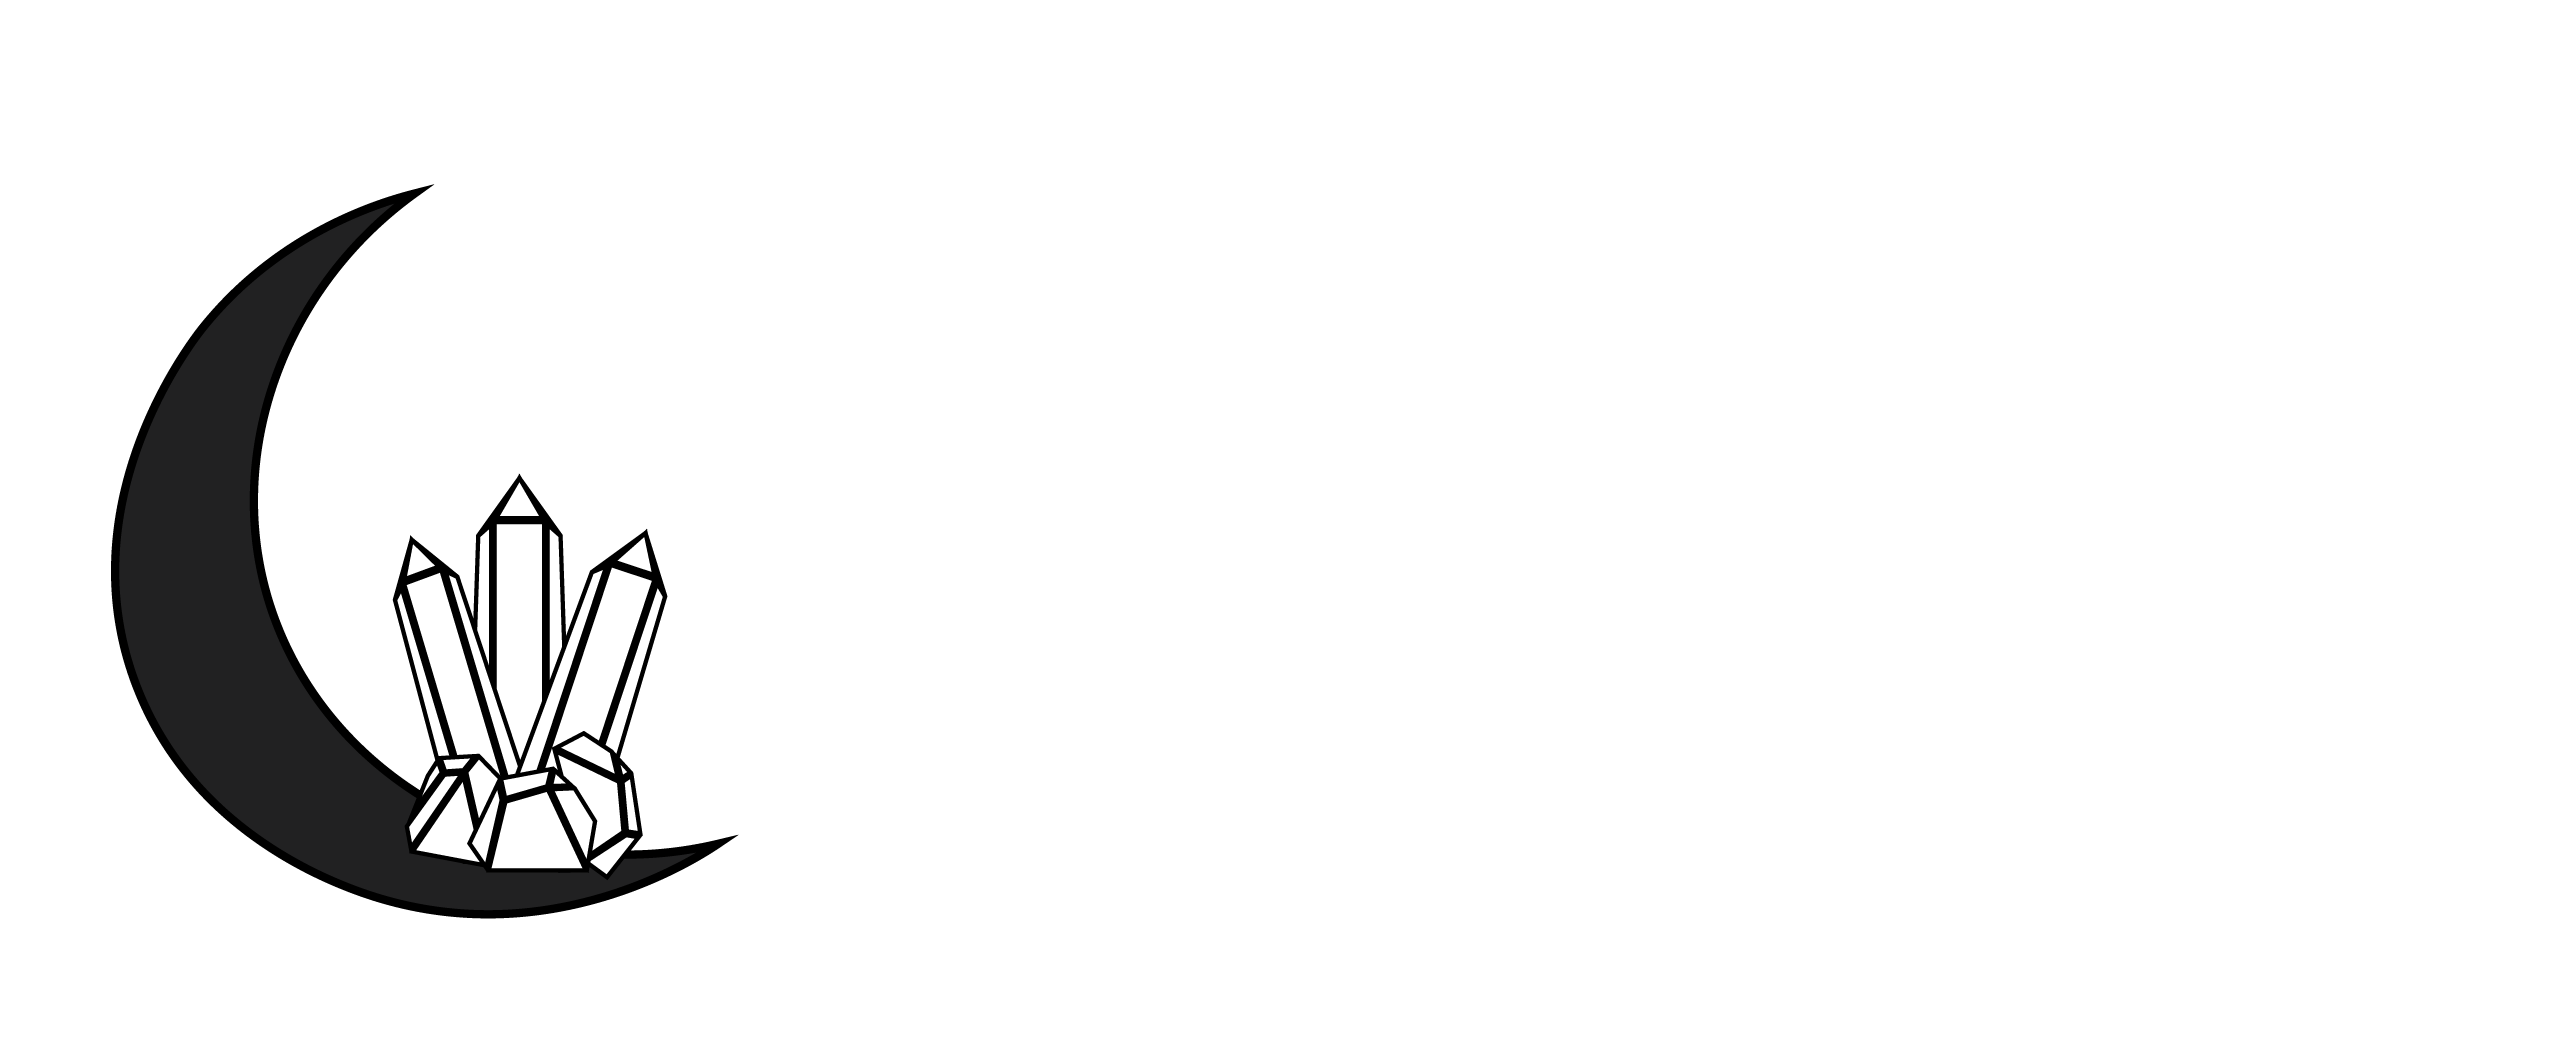 The Witchy Photographer